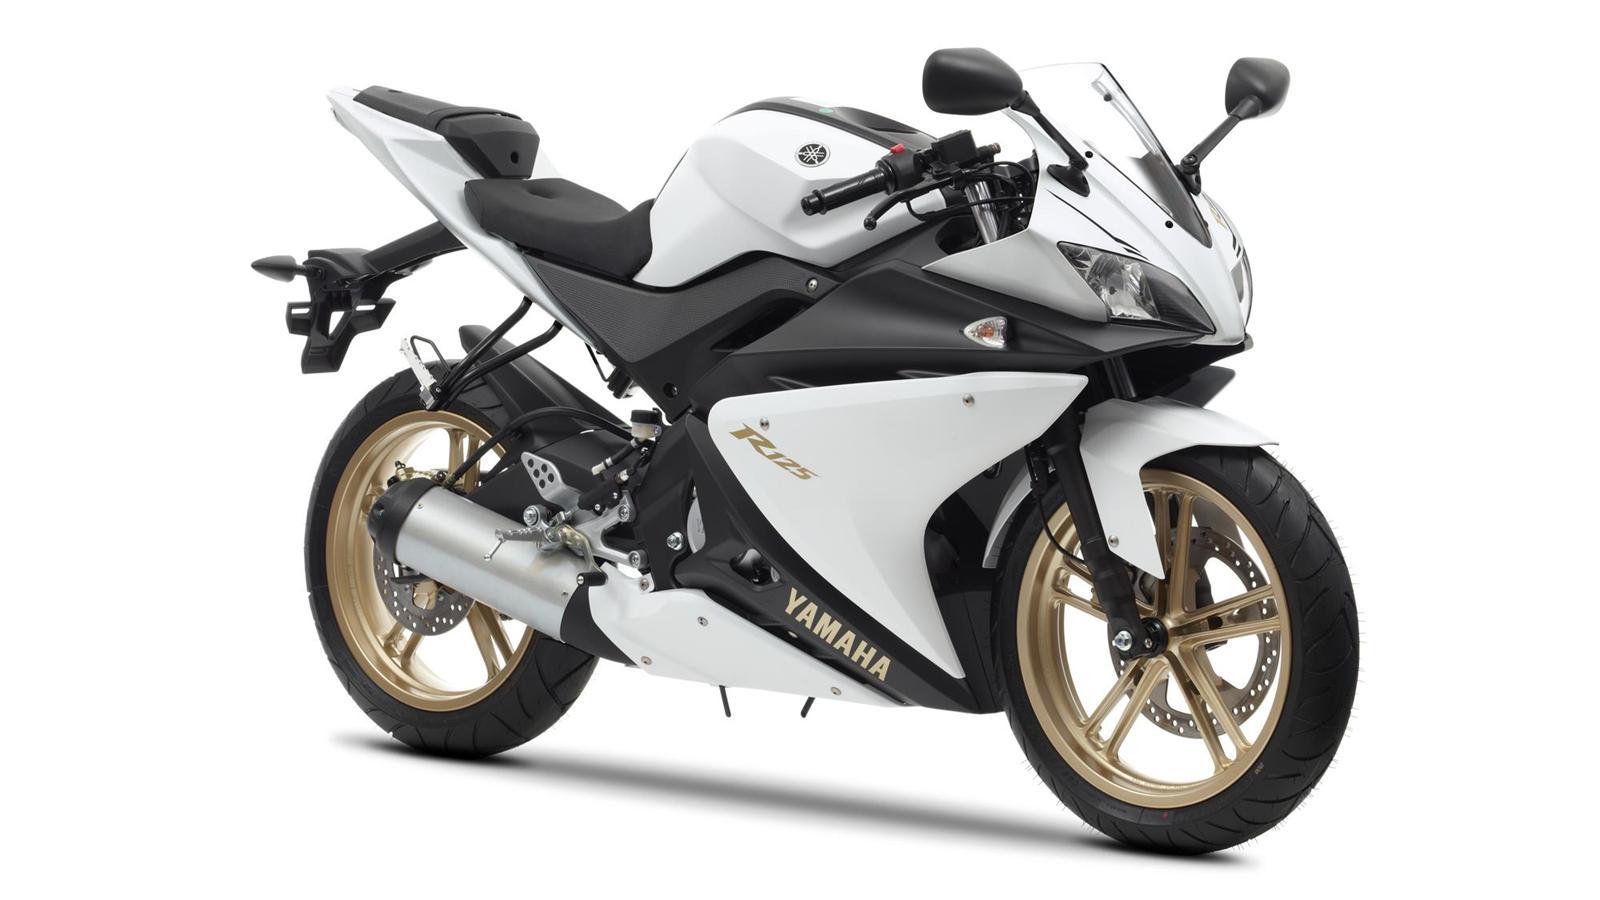 Yamaha YZF R125 Picture, Photo, Wallpaper